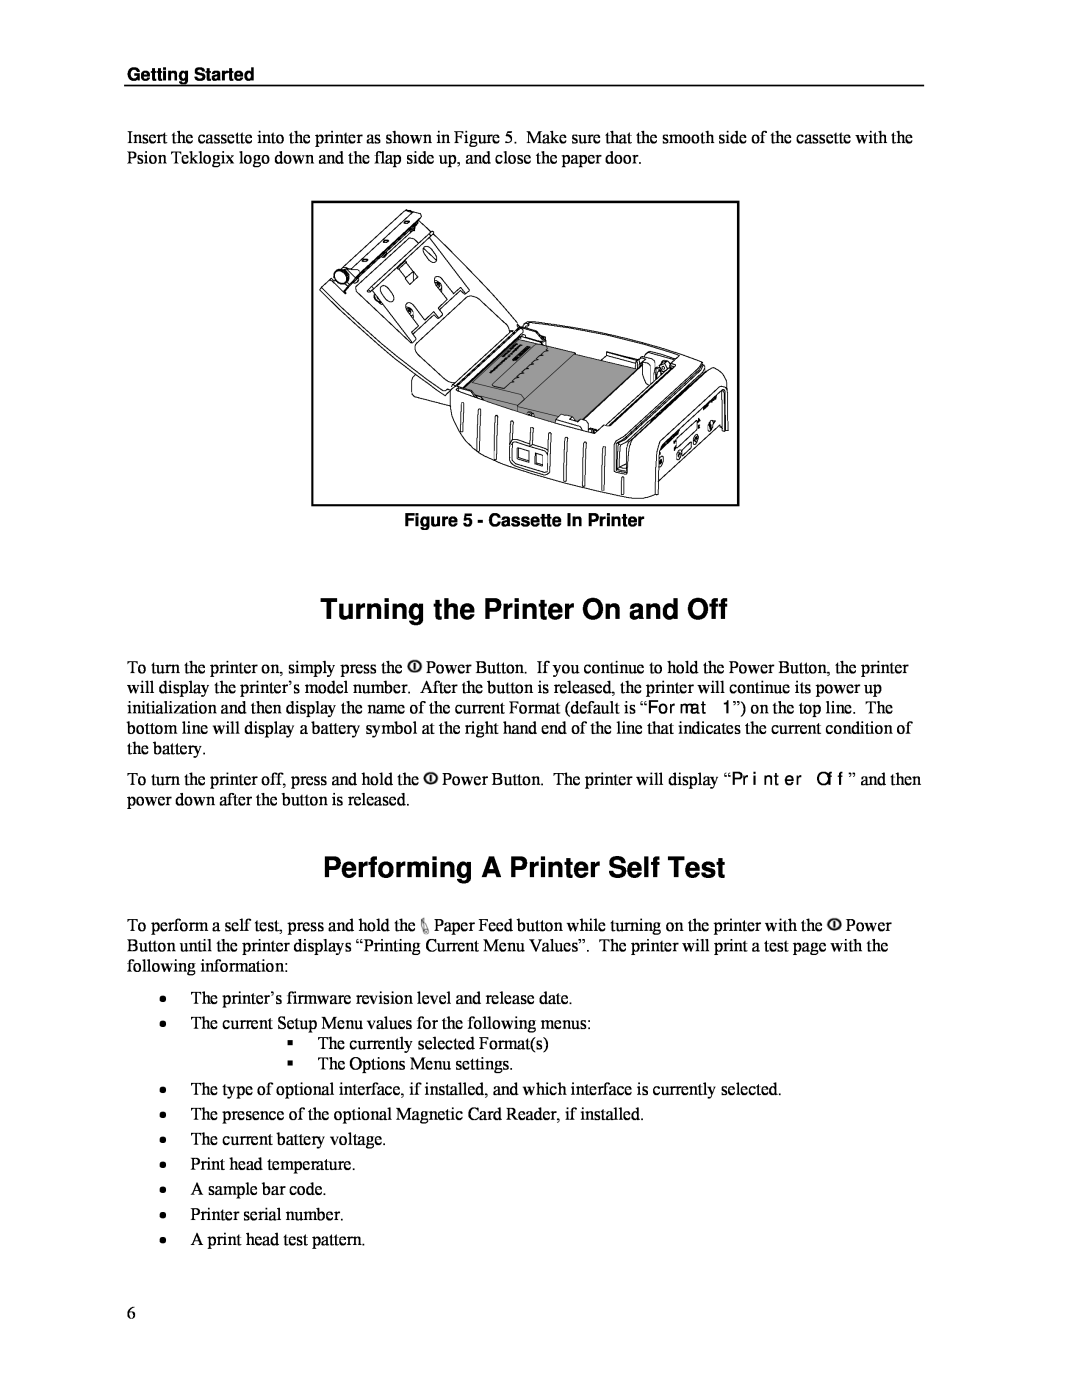 Psion Teklogix MLP 3040 Series manual Turning the Printer On and Off, Performing A Printer Self Test, Cassette In Printer 